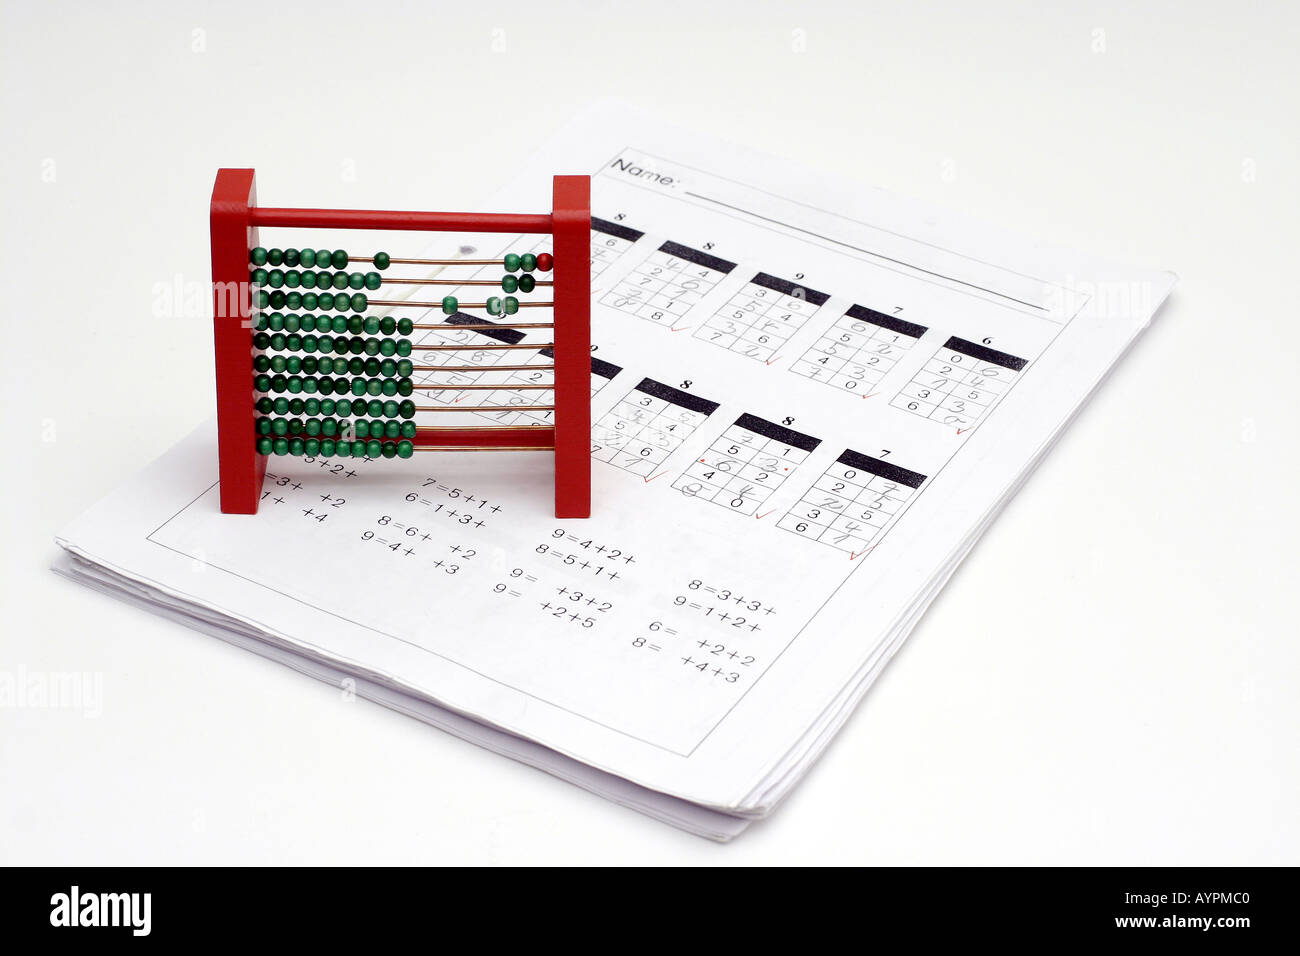 An abacus is placed on the papers with mathematical equations written on it Stock Photo